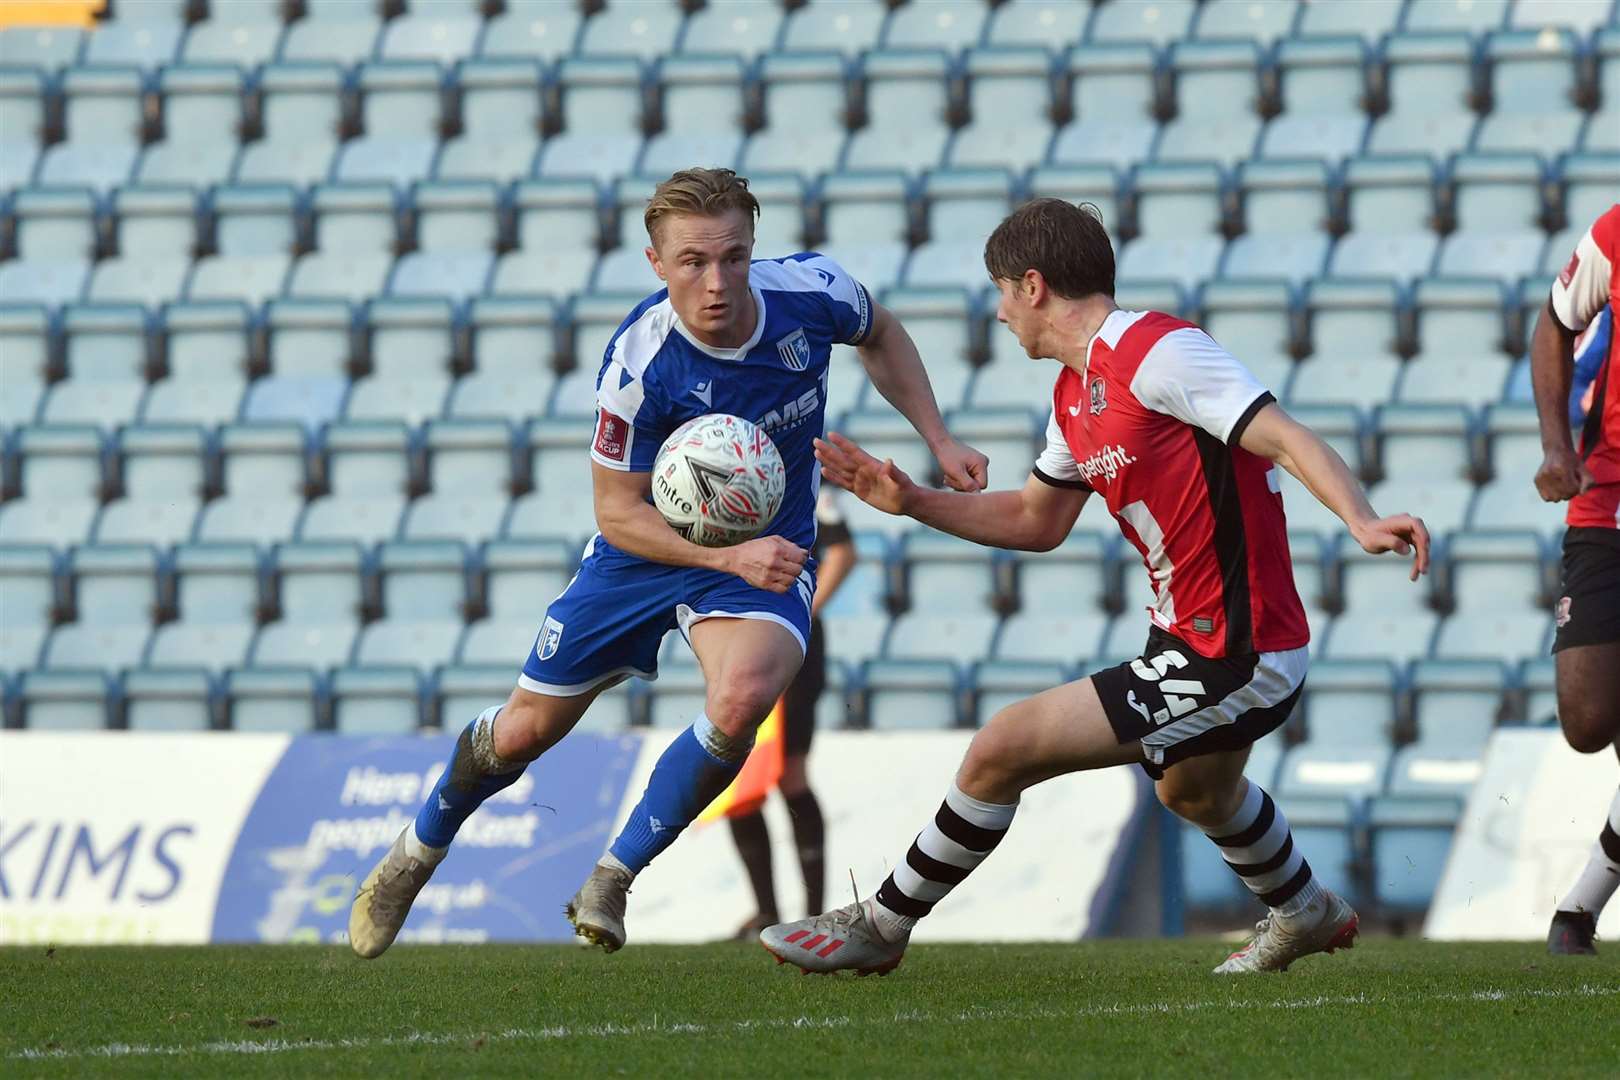 Gillingham captain in action against Exeter City in the FA Cup Picture: Keith Gillard